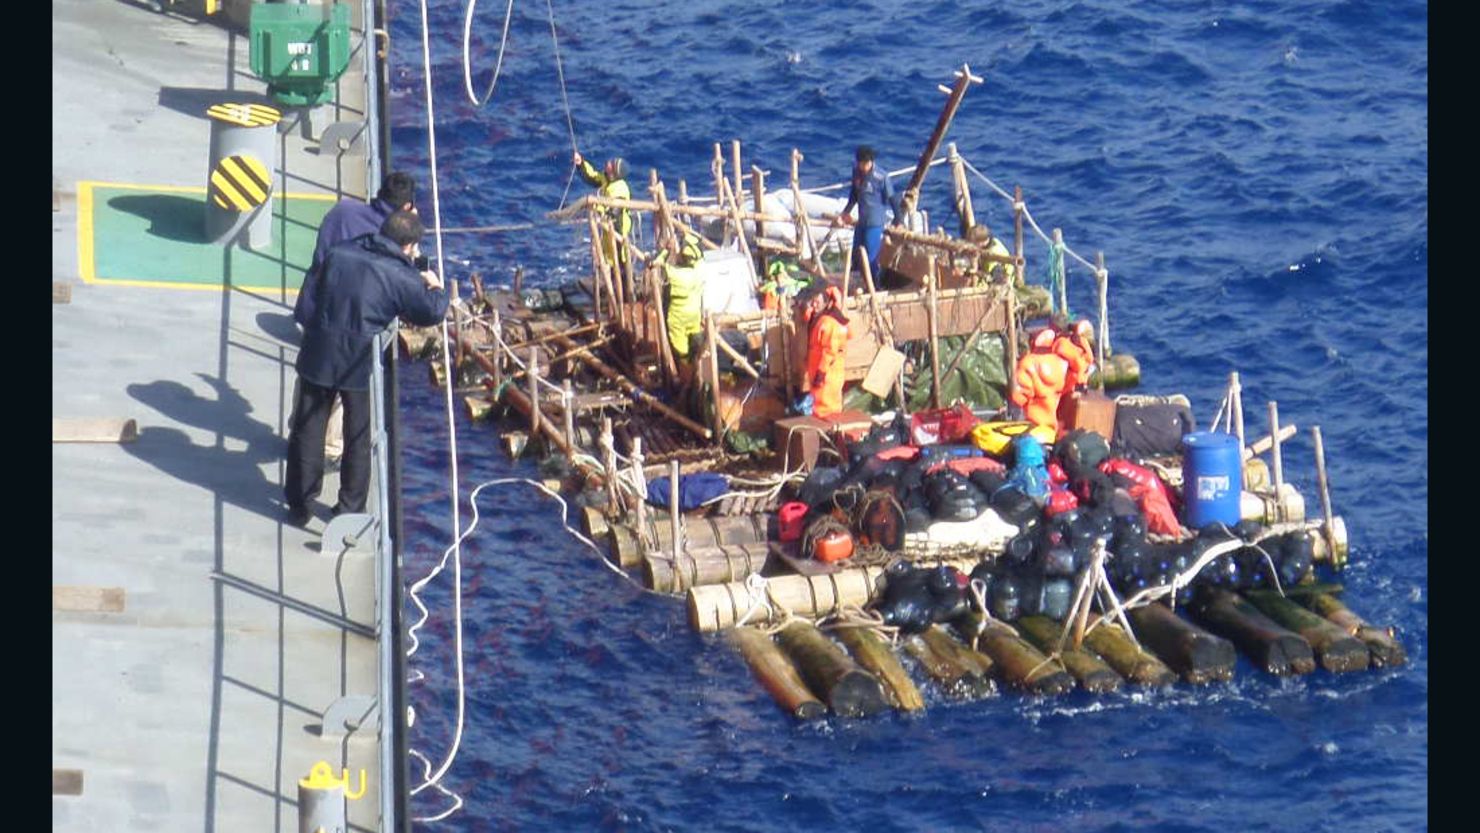 The rafts were rescued hundreds of miles off the coast of Chile.